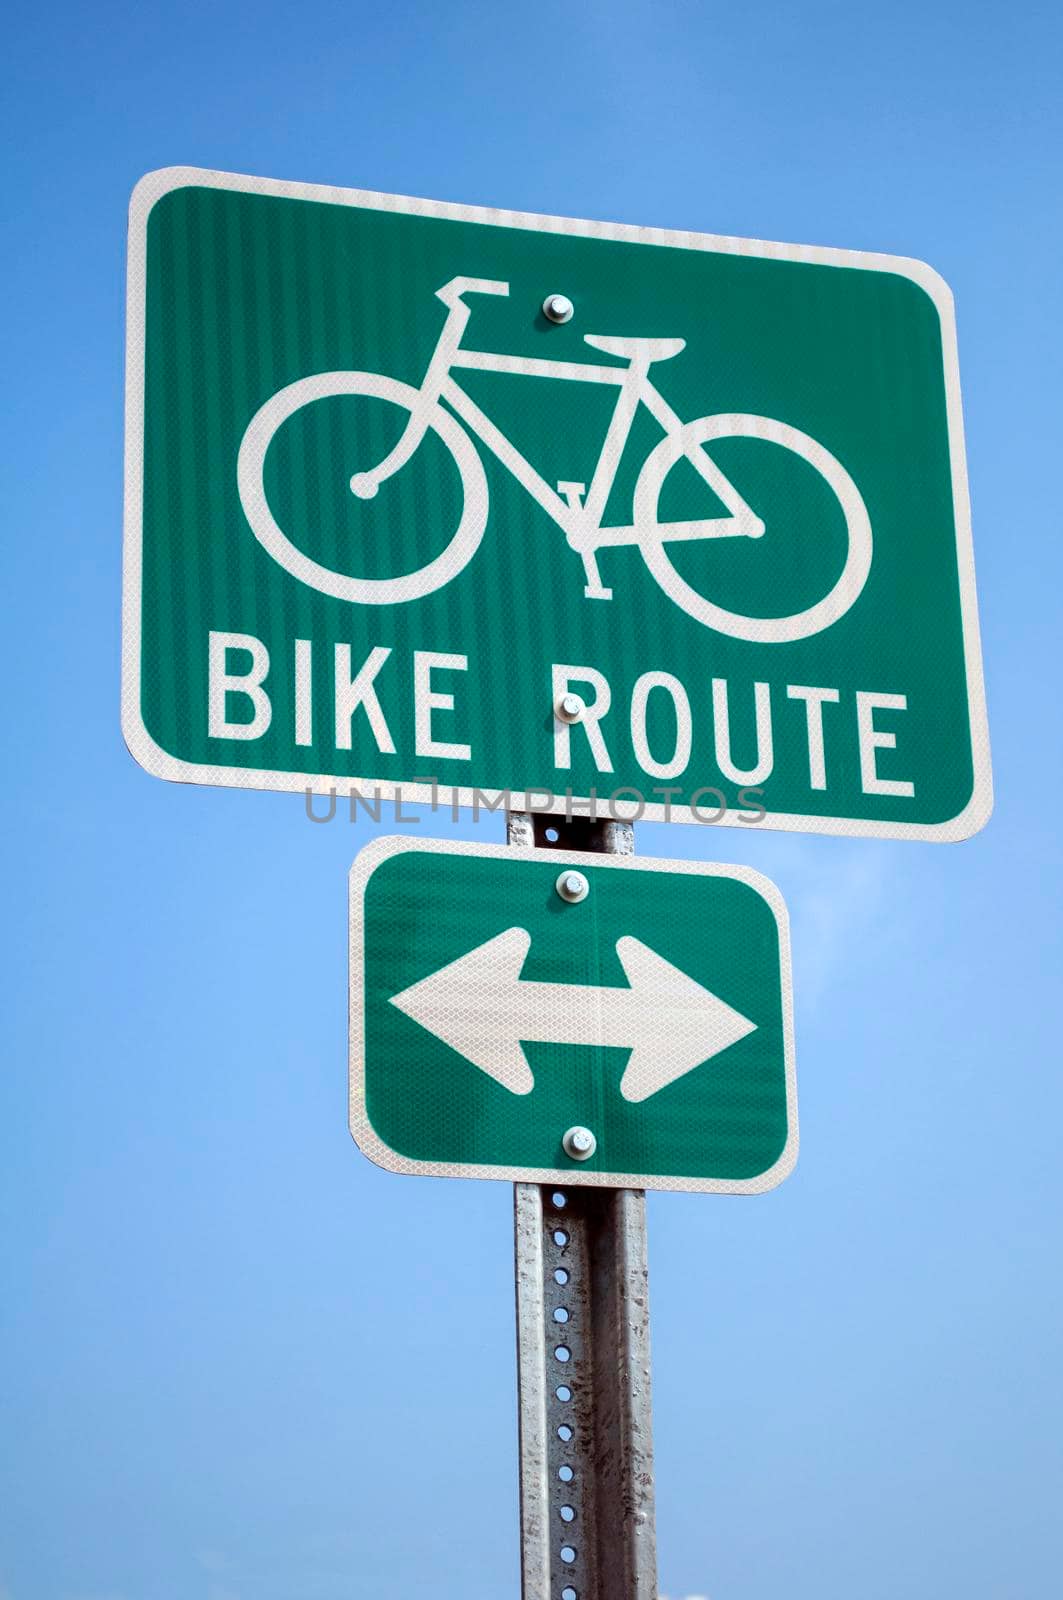 Bicycle route sign. by FER737NG